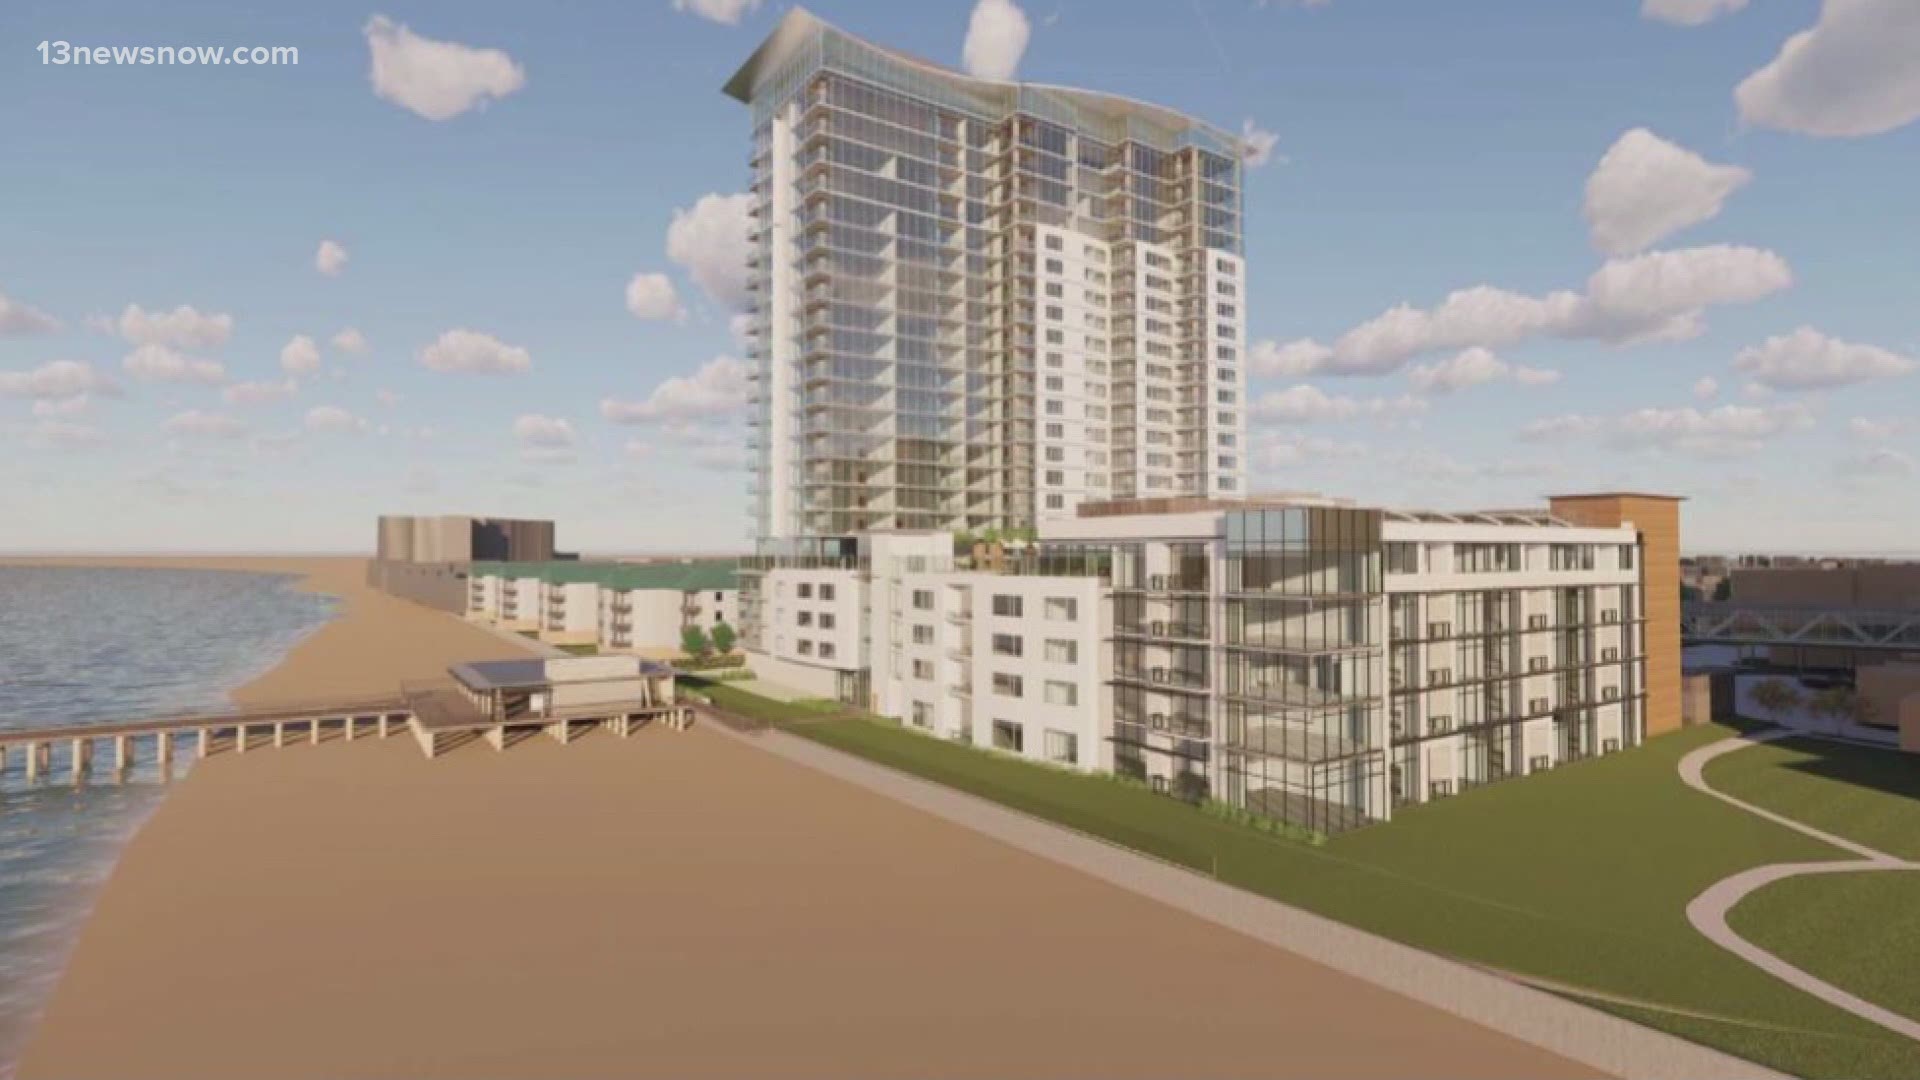 The 5-2 vote came after hours of public discussion, with dozens of speakers coming forward to voice or oppose the 22-floor Westminster-Canterbury expansion.